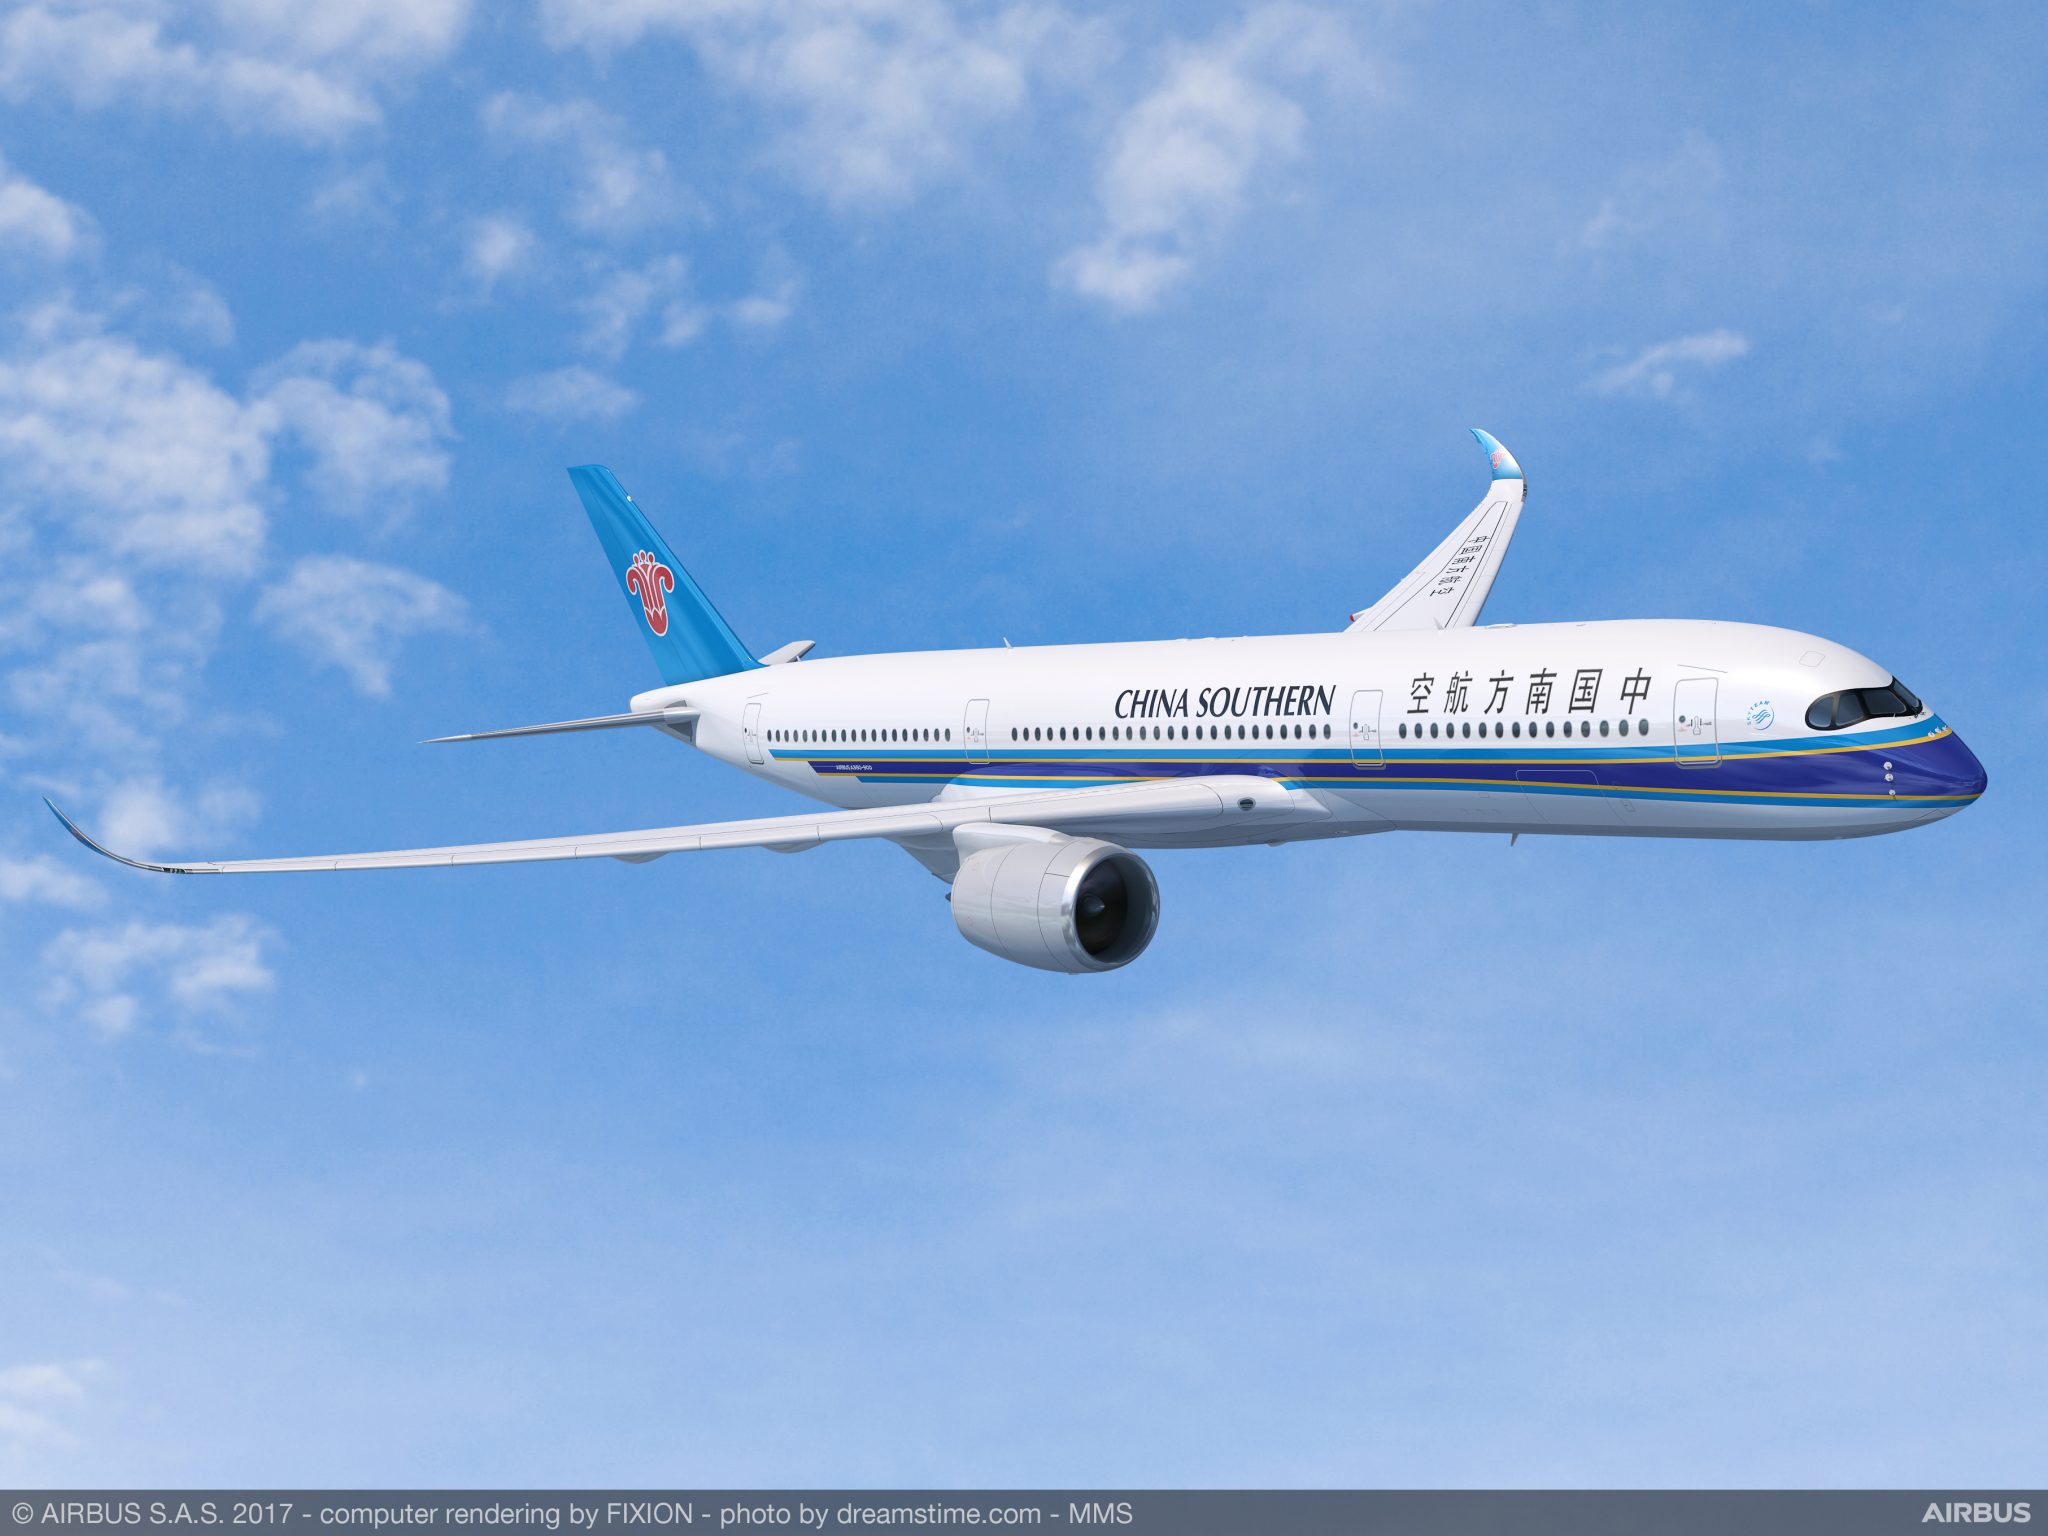 China Southern Airlines orders 20 Airbus A350 XWBs